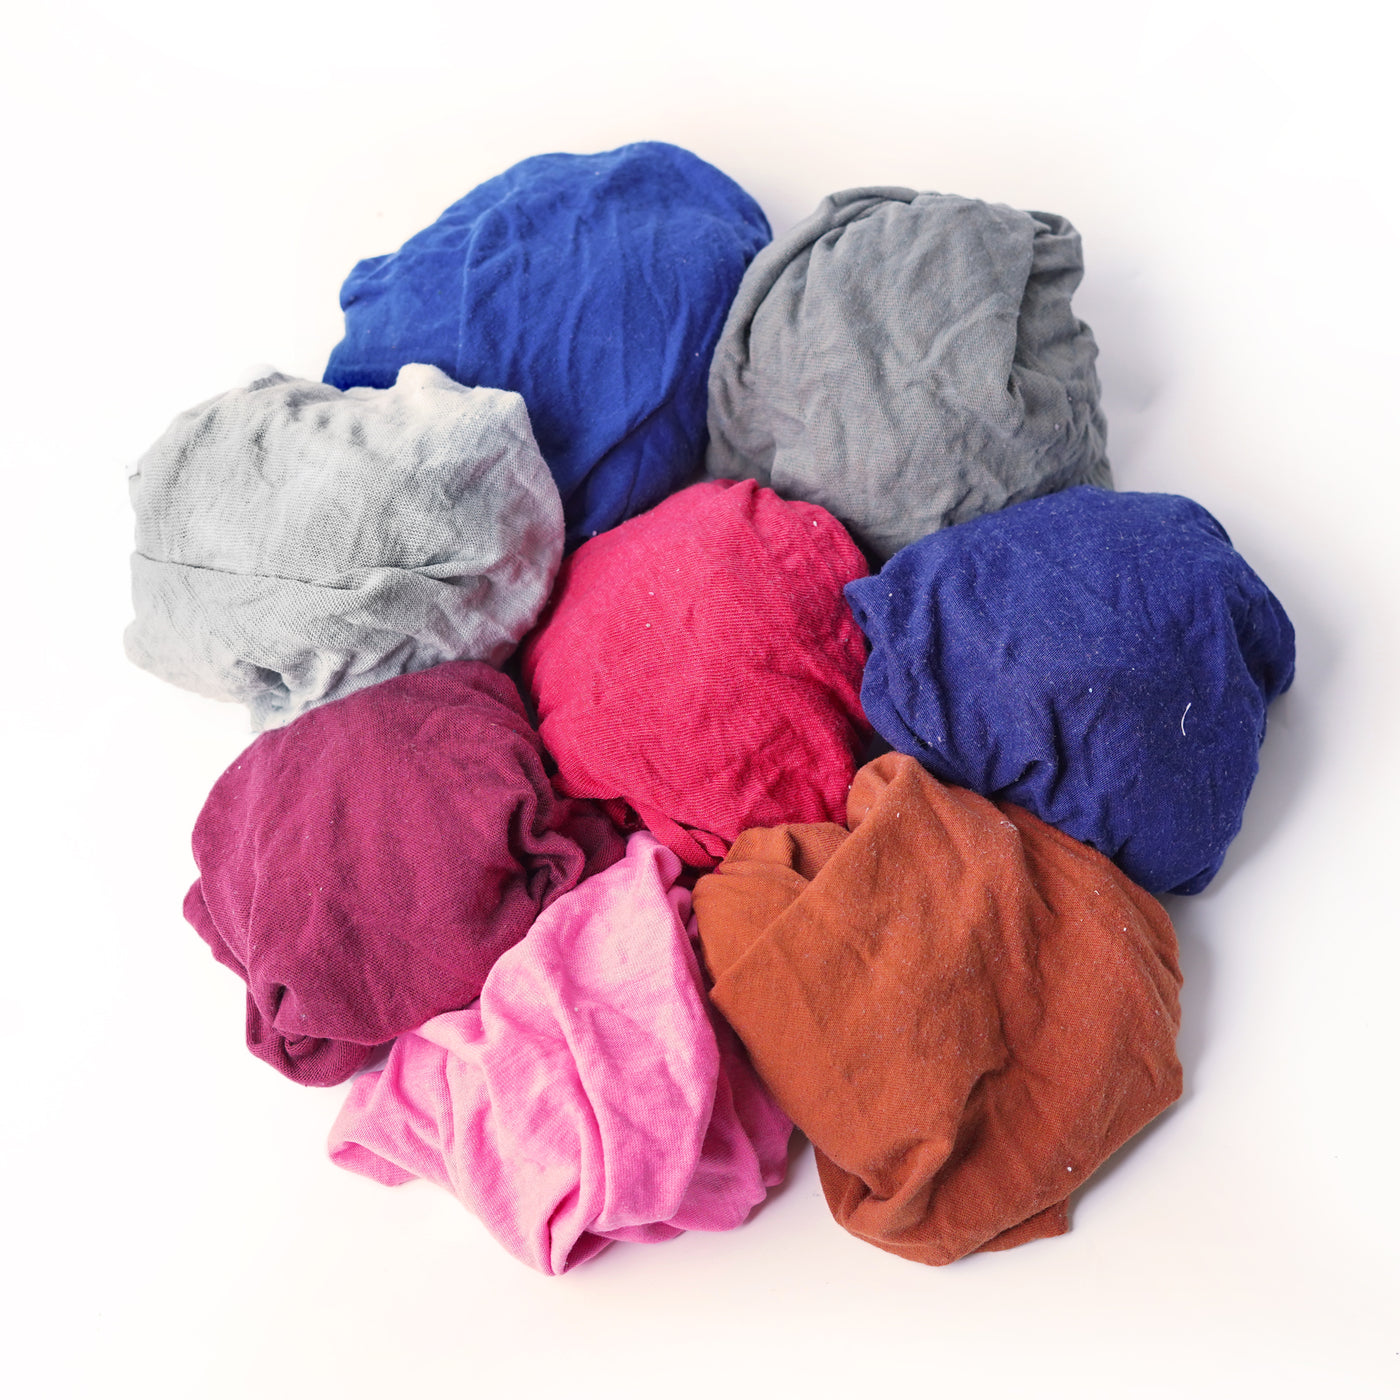 Special Colored Knit Fleece Rags: 40 lbs, Sweat Shirt Material